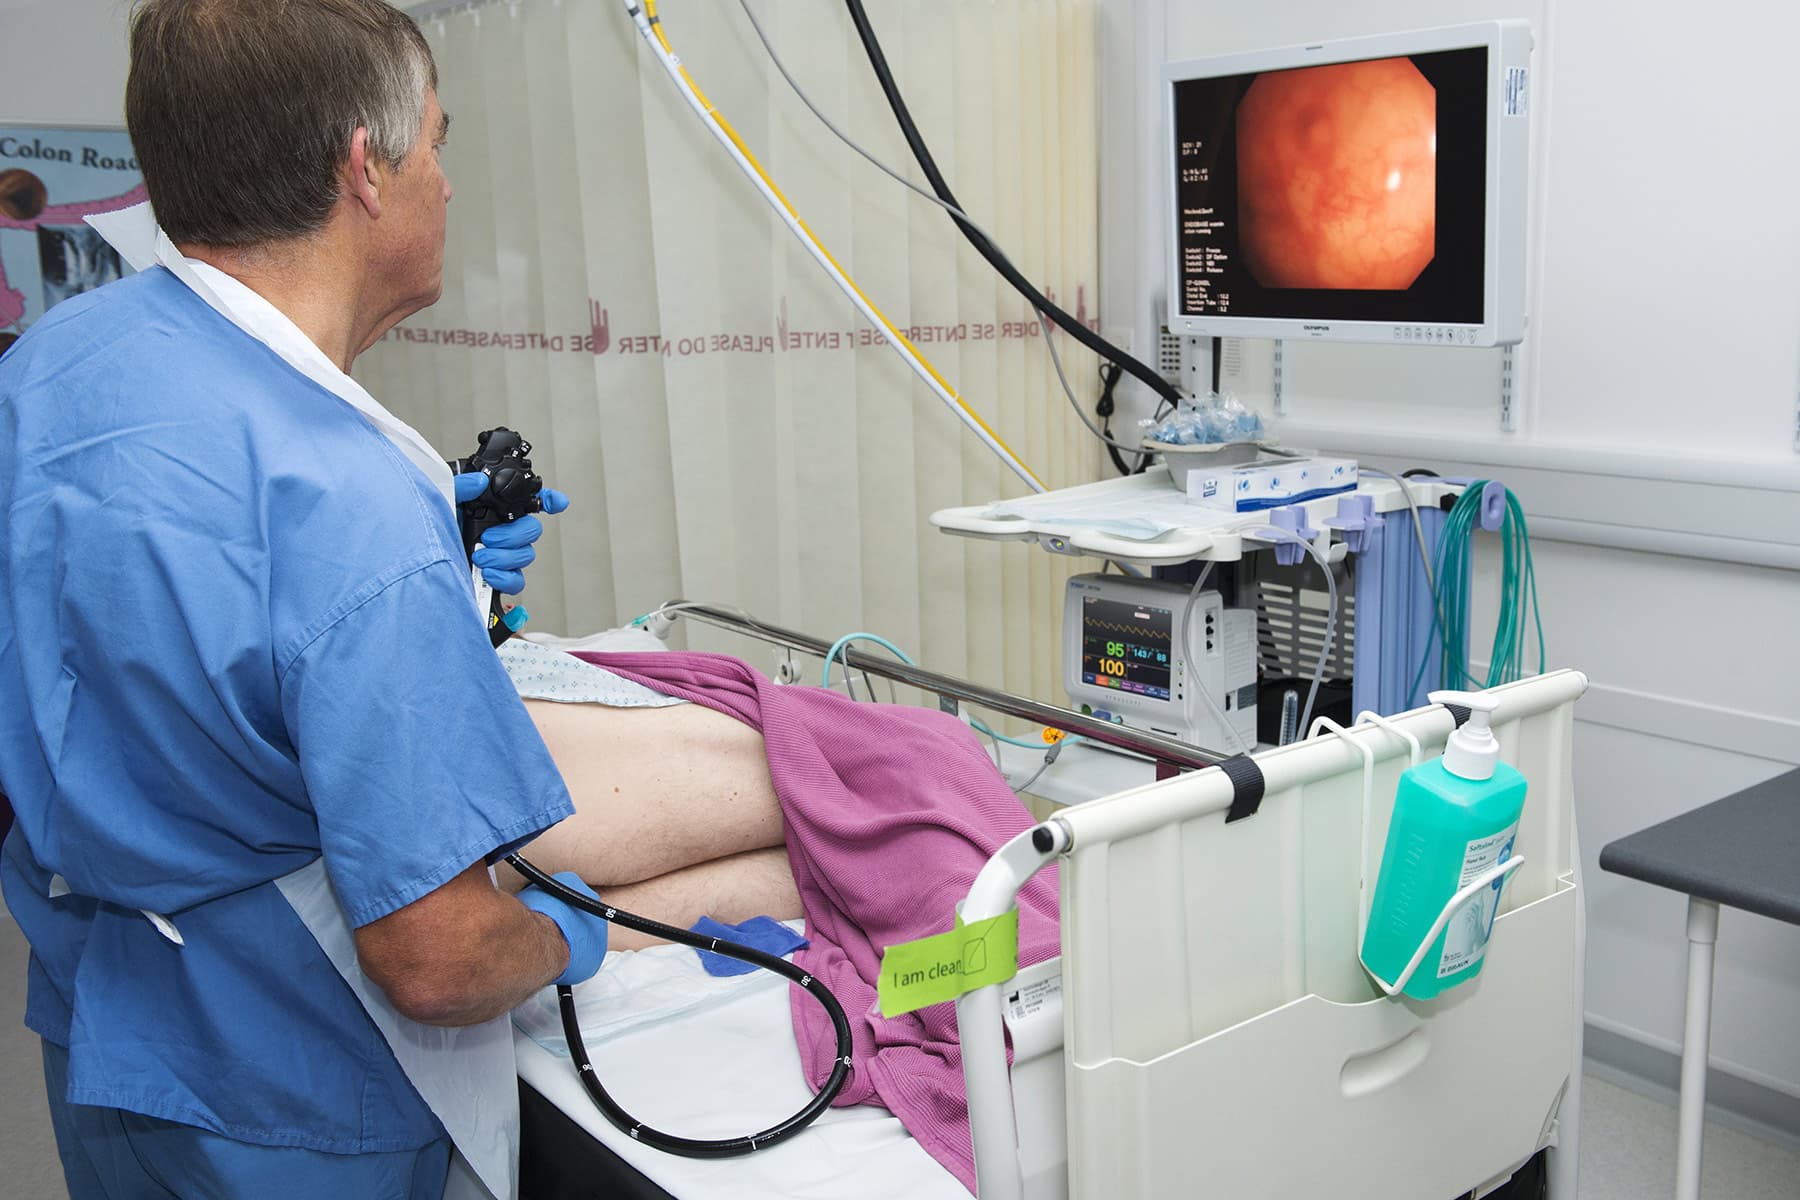 Colonoscopy Benefits Lower Than Expected, Study Shows